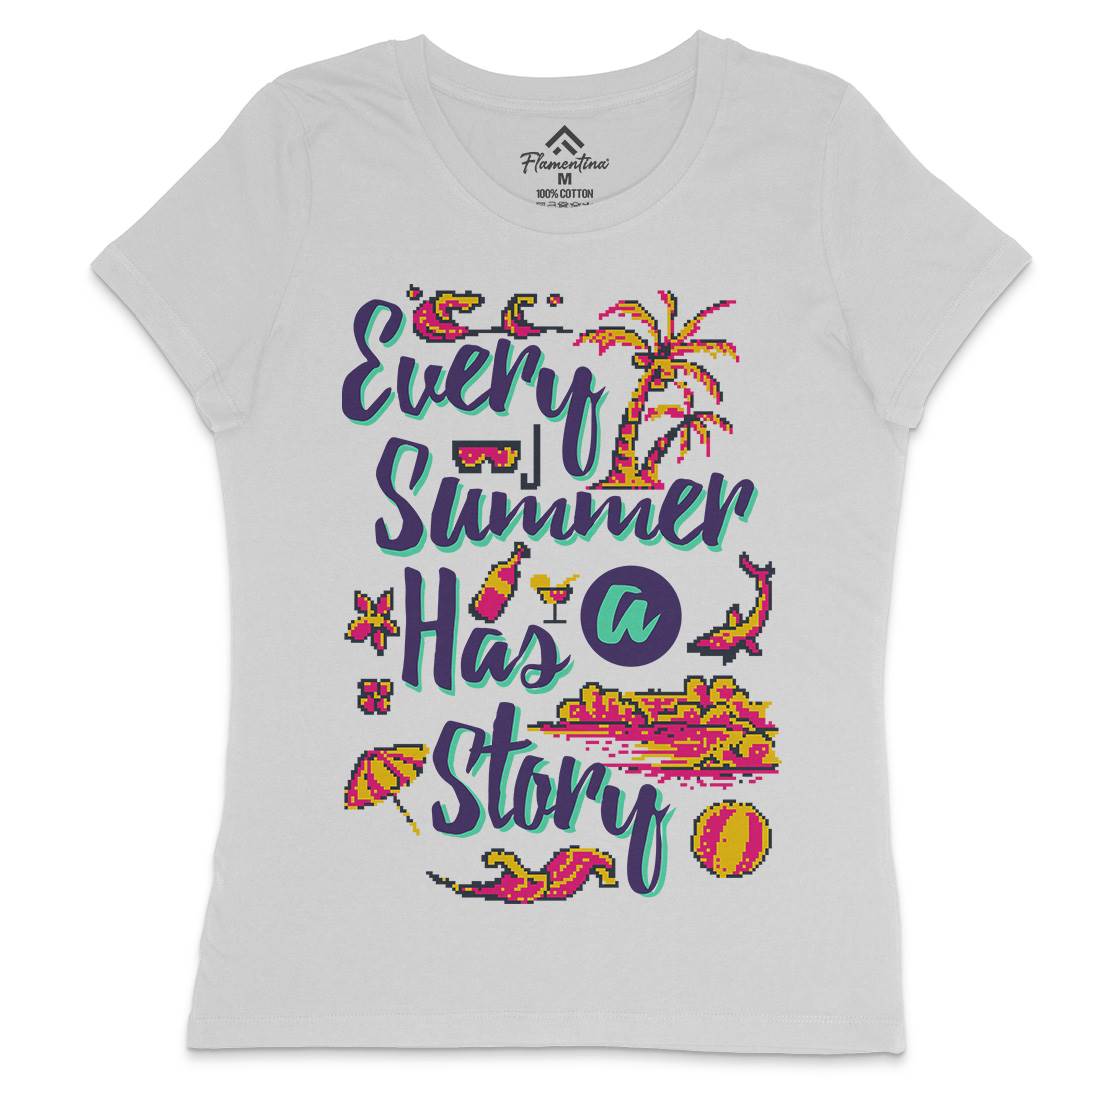 Every Summer Has A Story Womens Crew Neck T-Shirt Nature B896